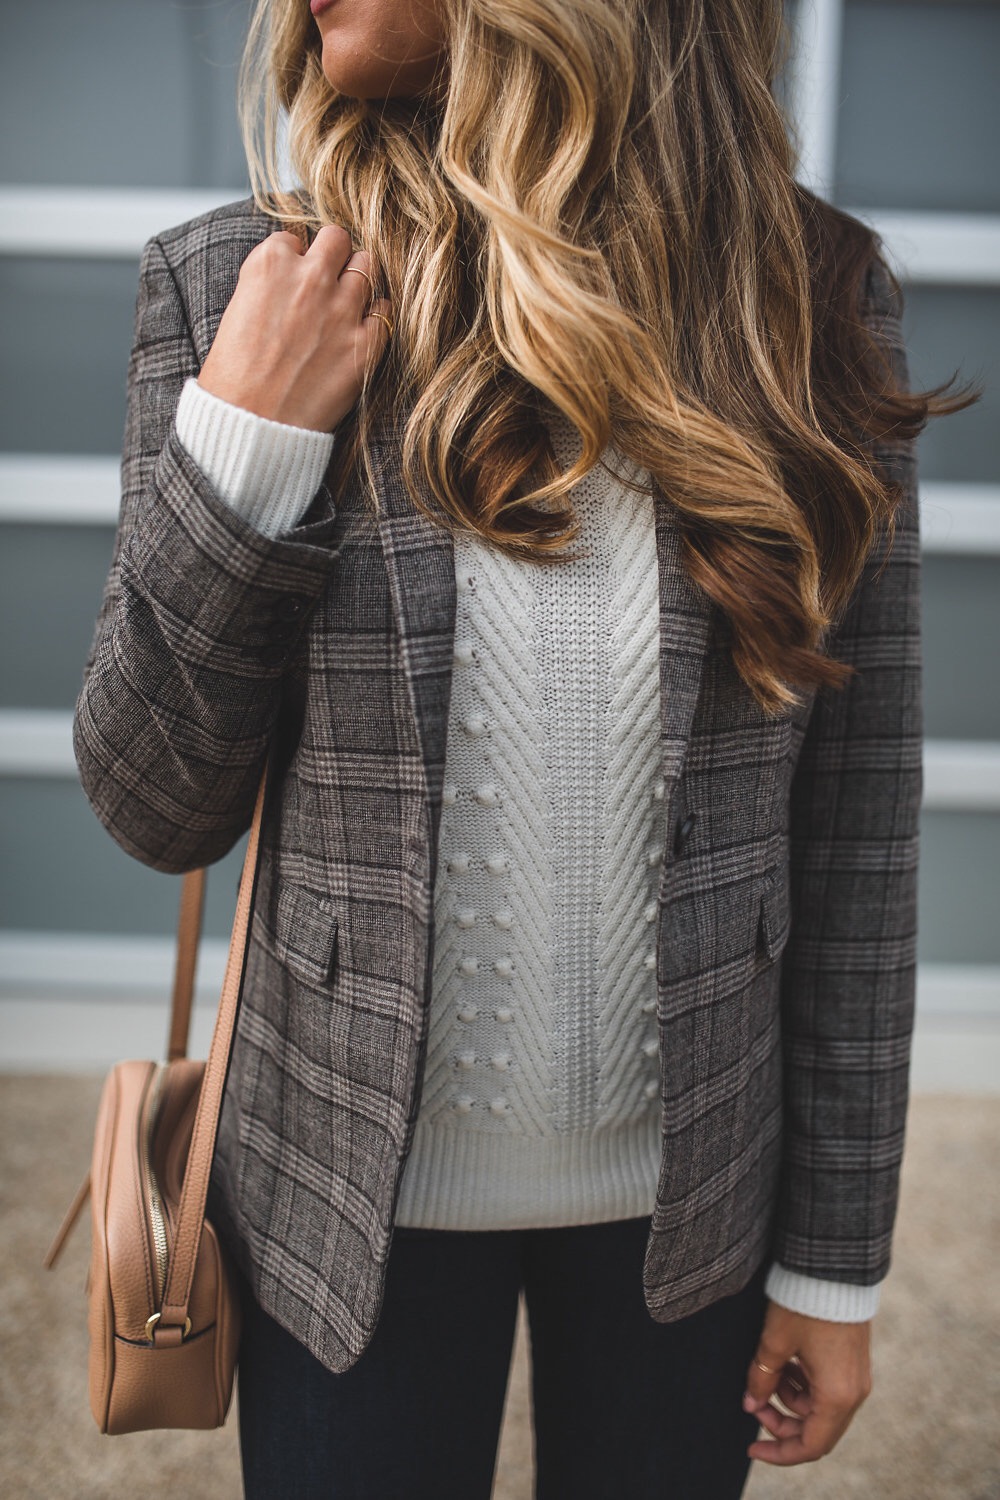 Plaid Blazer and Cream Sweater Outfit 